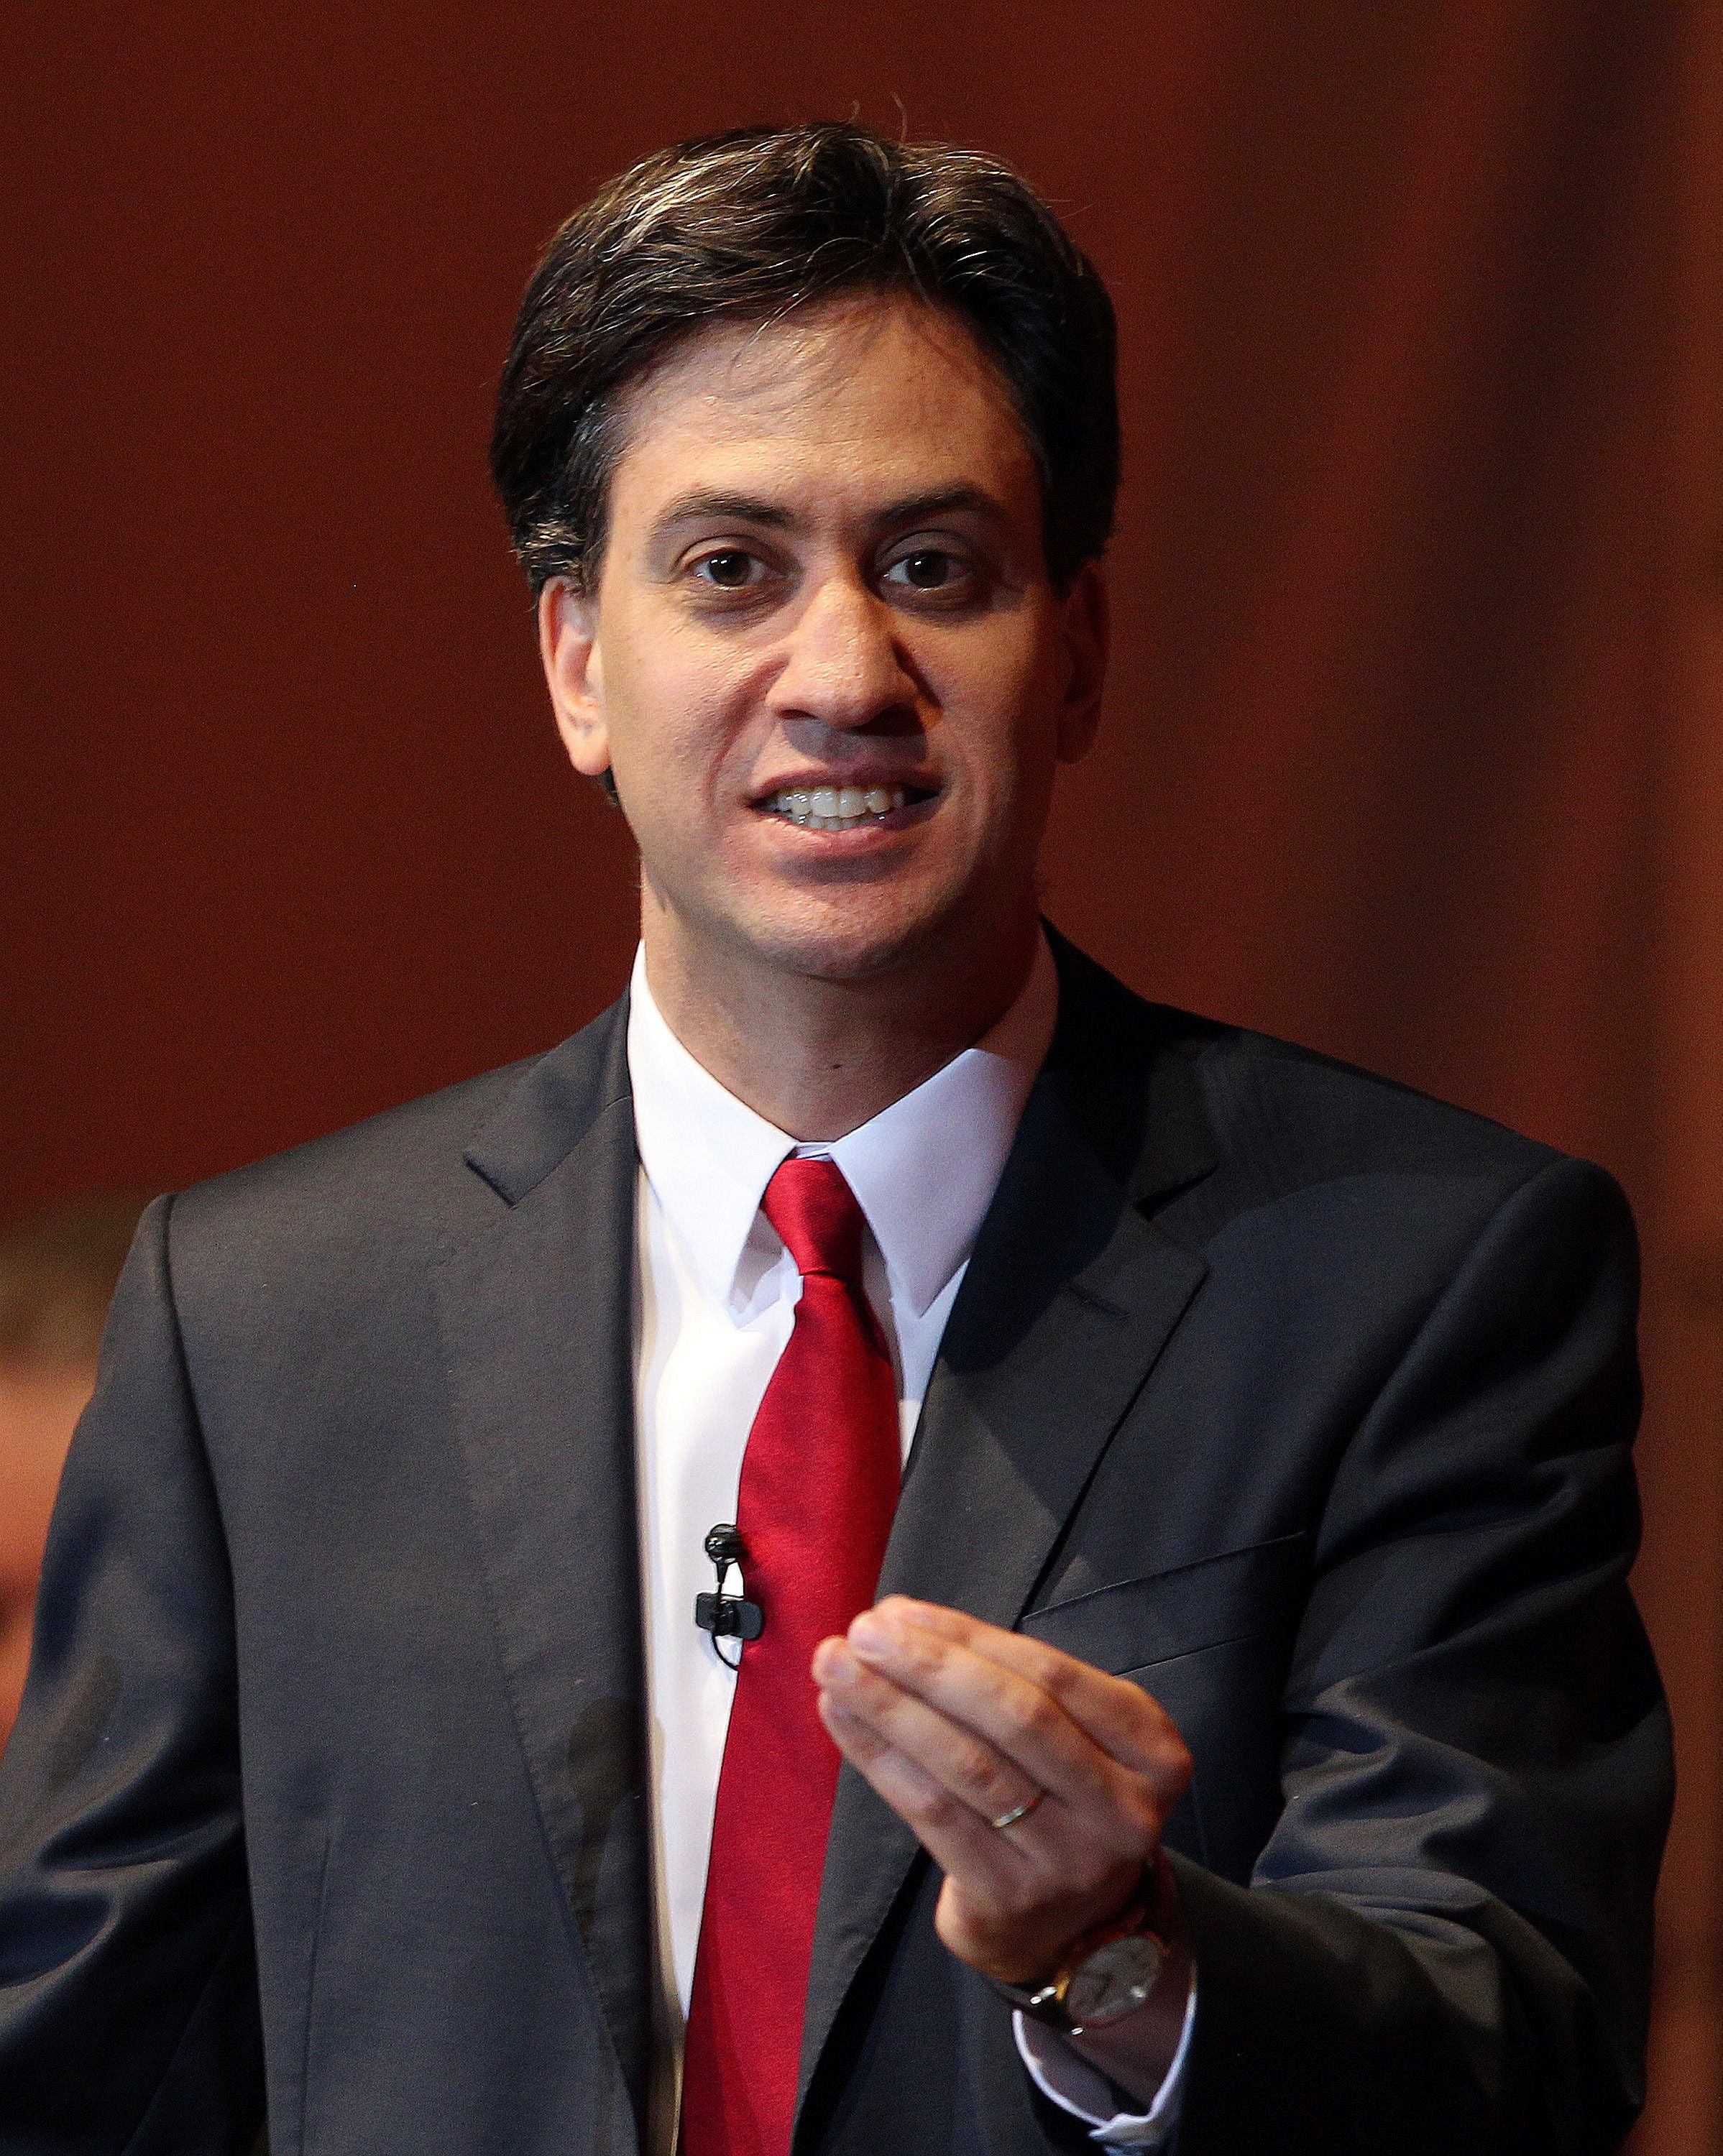 Ed Miliband is expected to meet Barack Obama in Washington as the Labour leader tries to burnish his foreign policy credentials in the run-up to the election